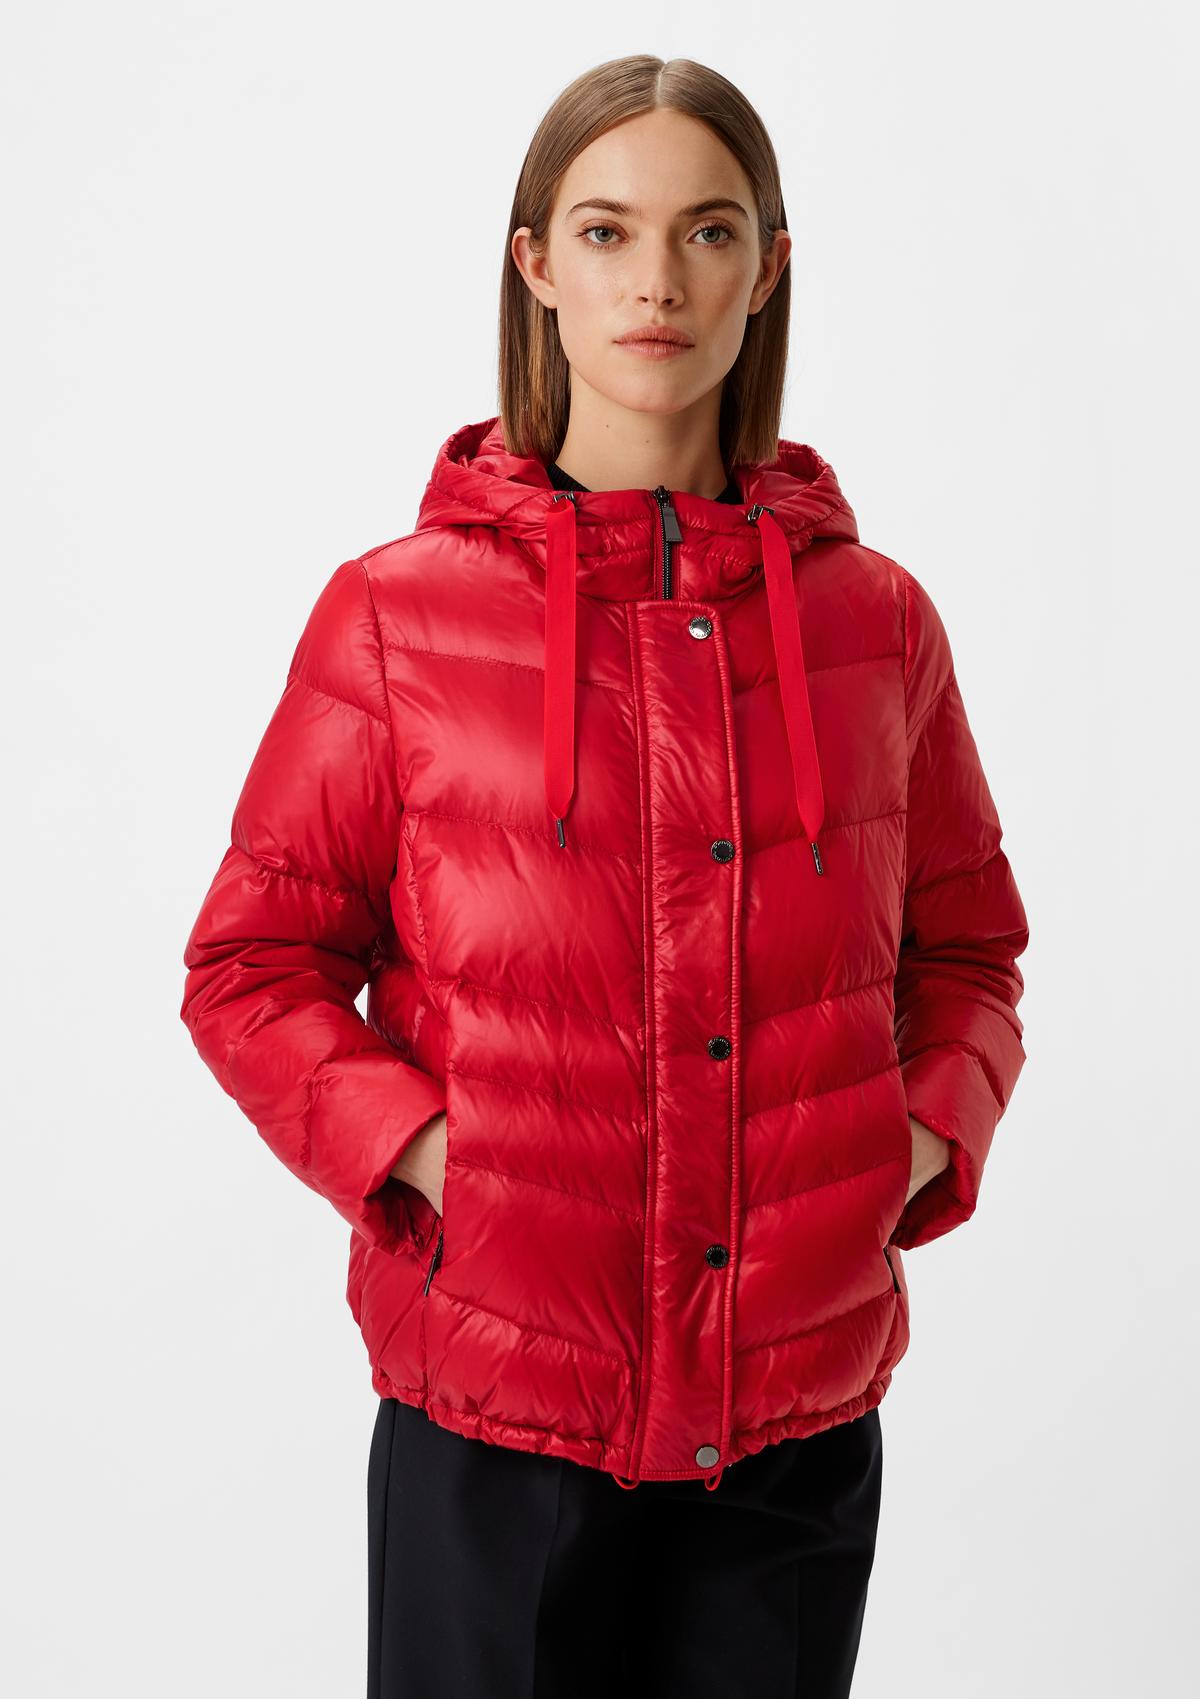 Winter jackets – warm and cosy | Comma